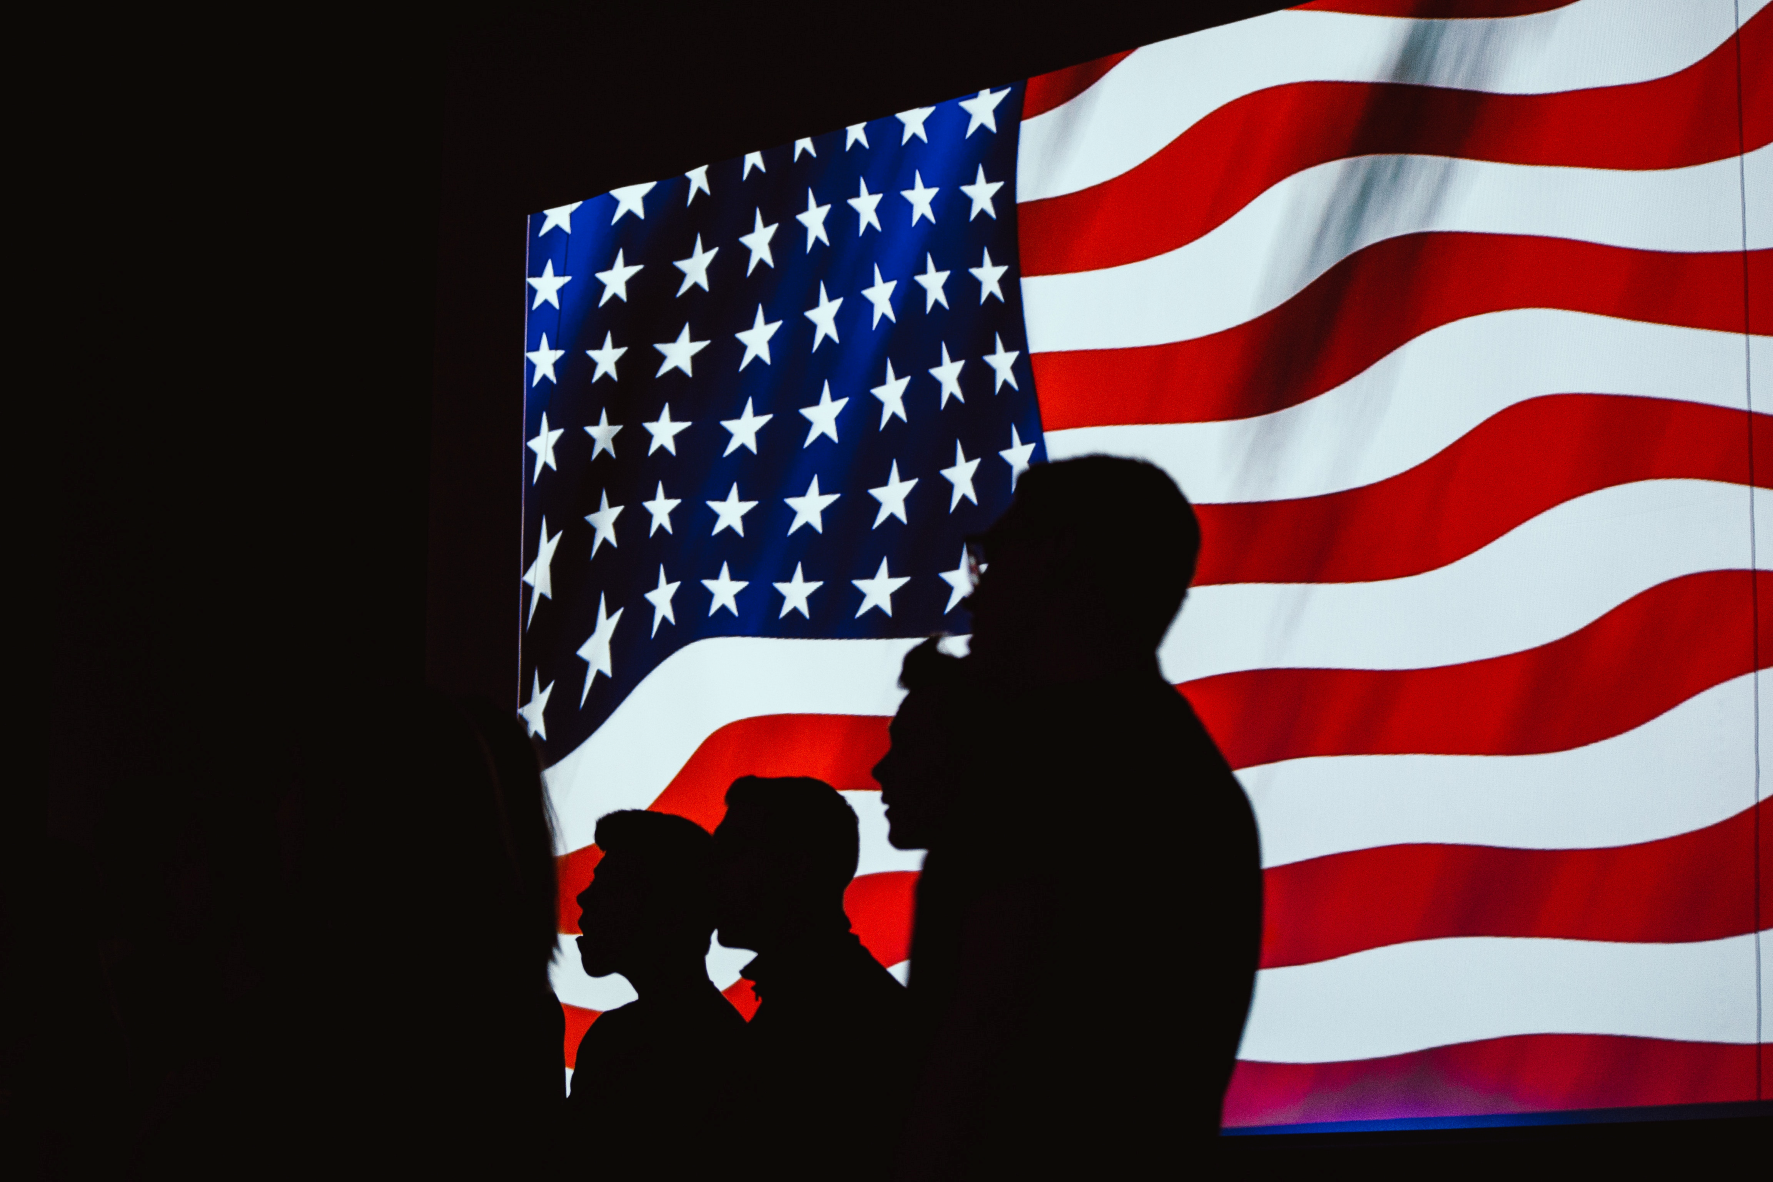 The photo shows the silhouette of four persons standing against the background of the US flag.